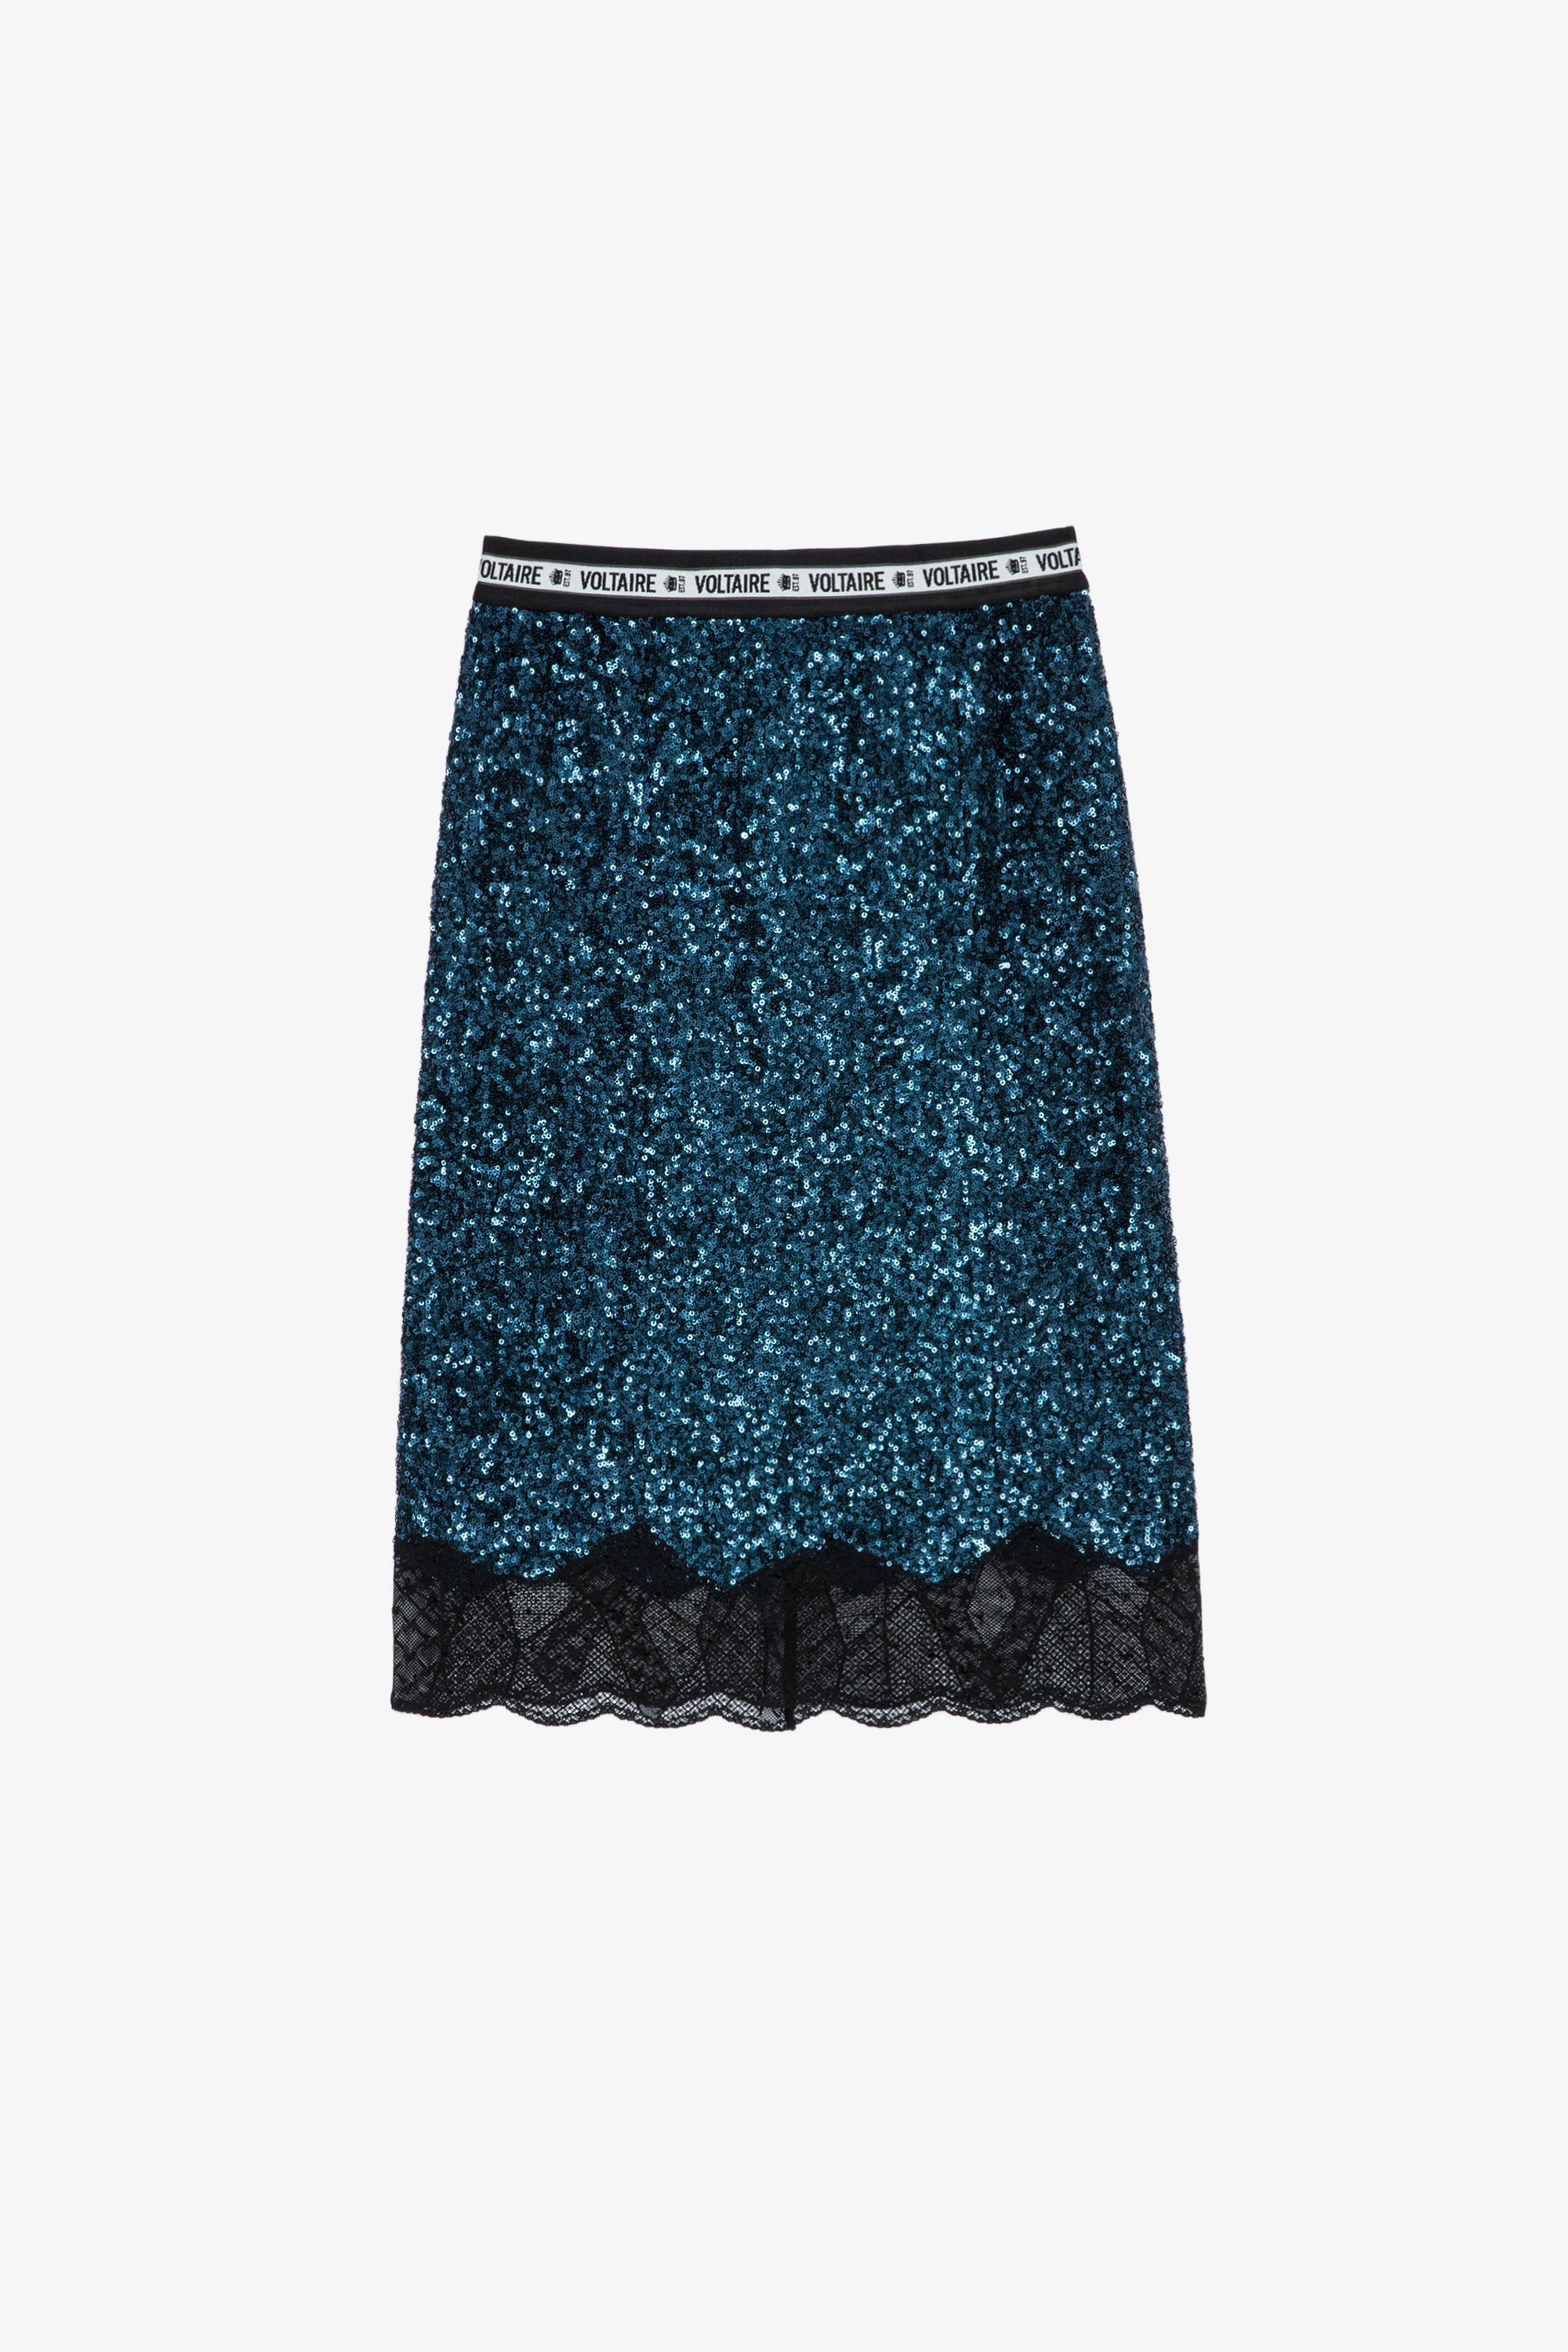 Justicia Sequins Skirt Women’s midi skirt decorated with blue sequins, patterned lace trim and crystal embellishment 